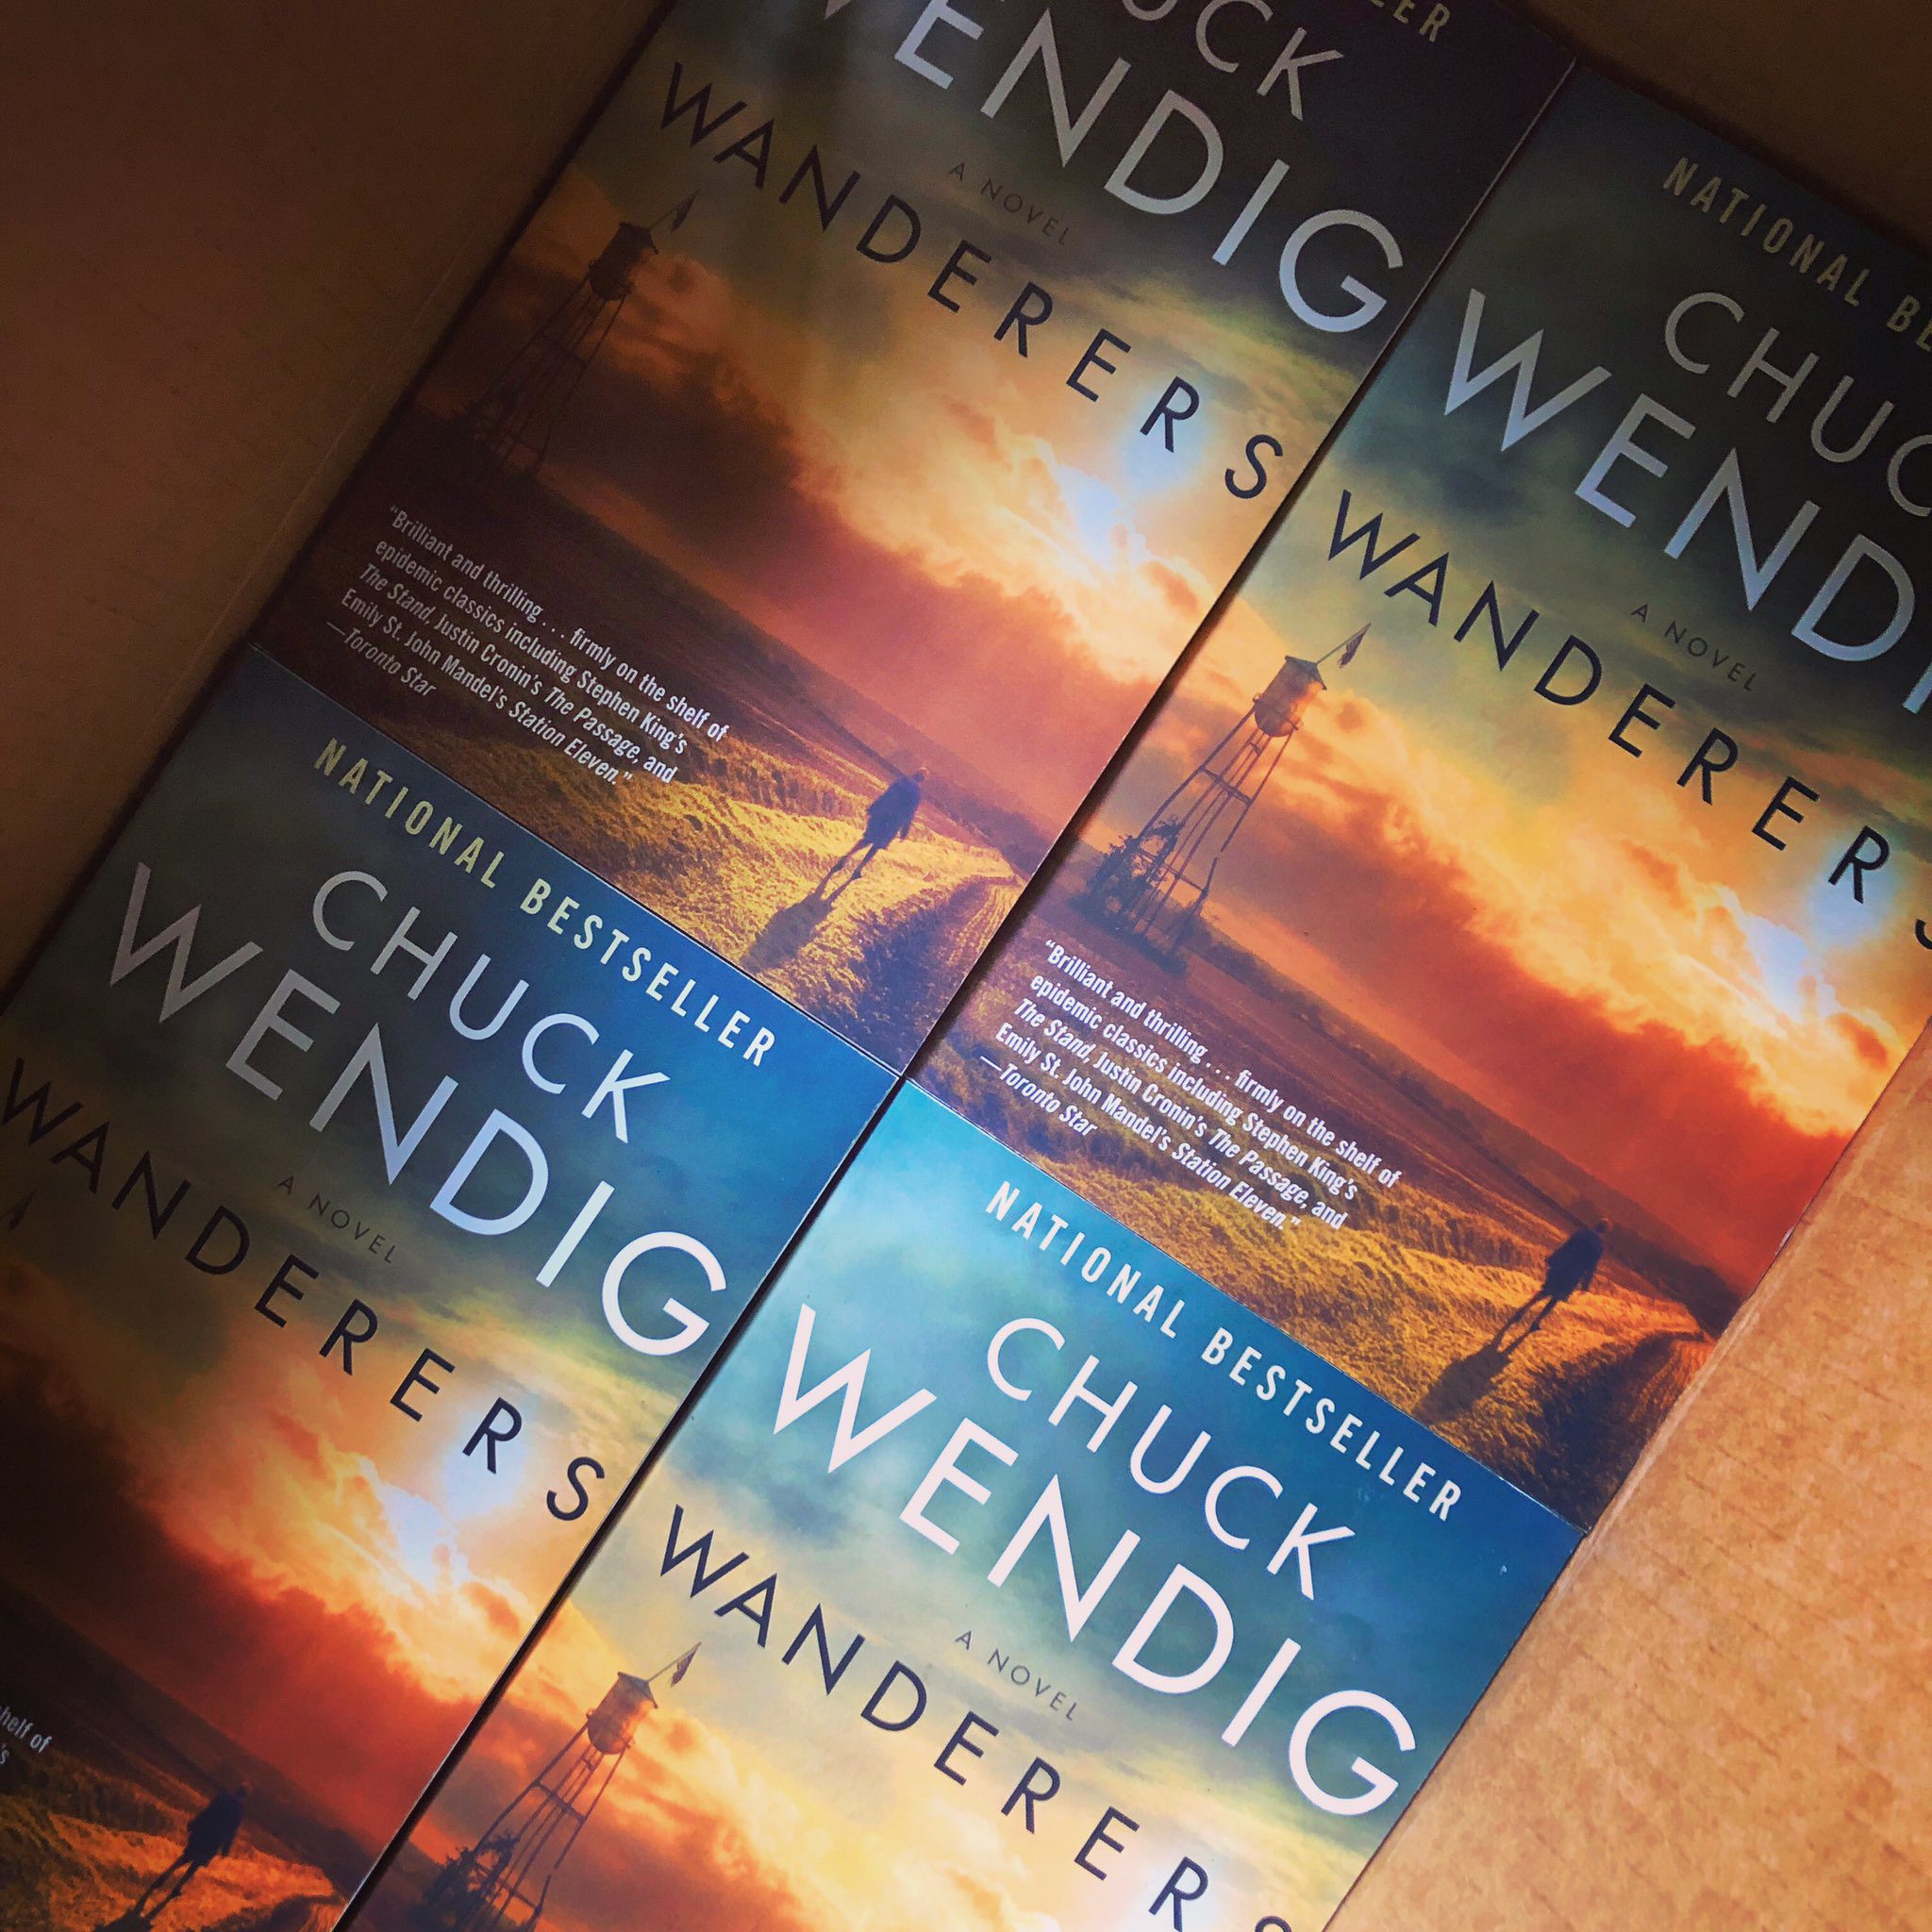 wanderers by chuck wendig